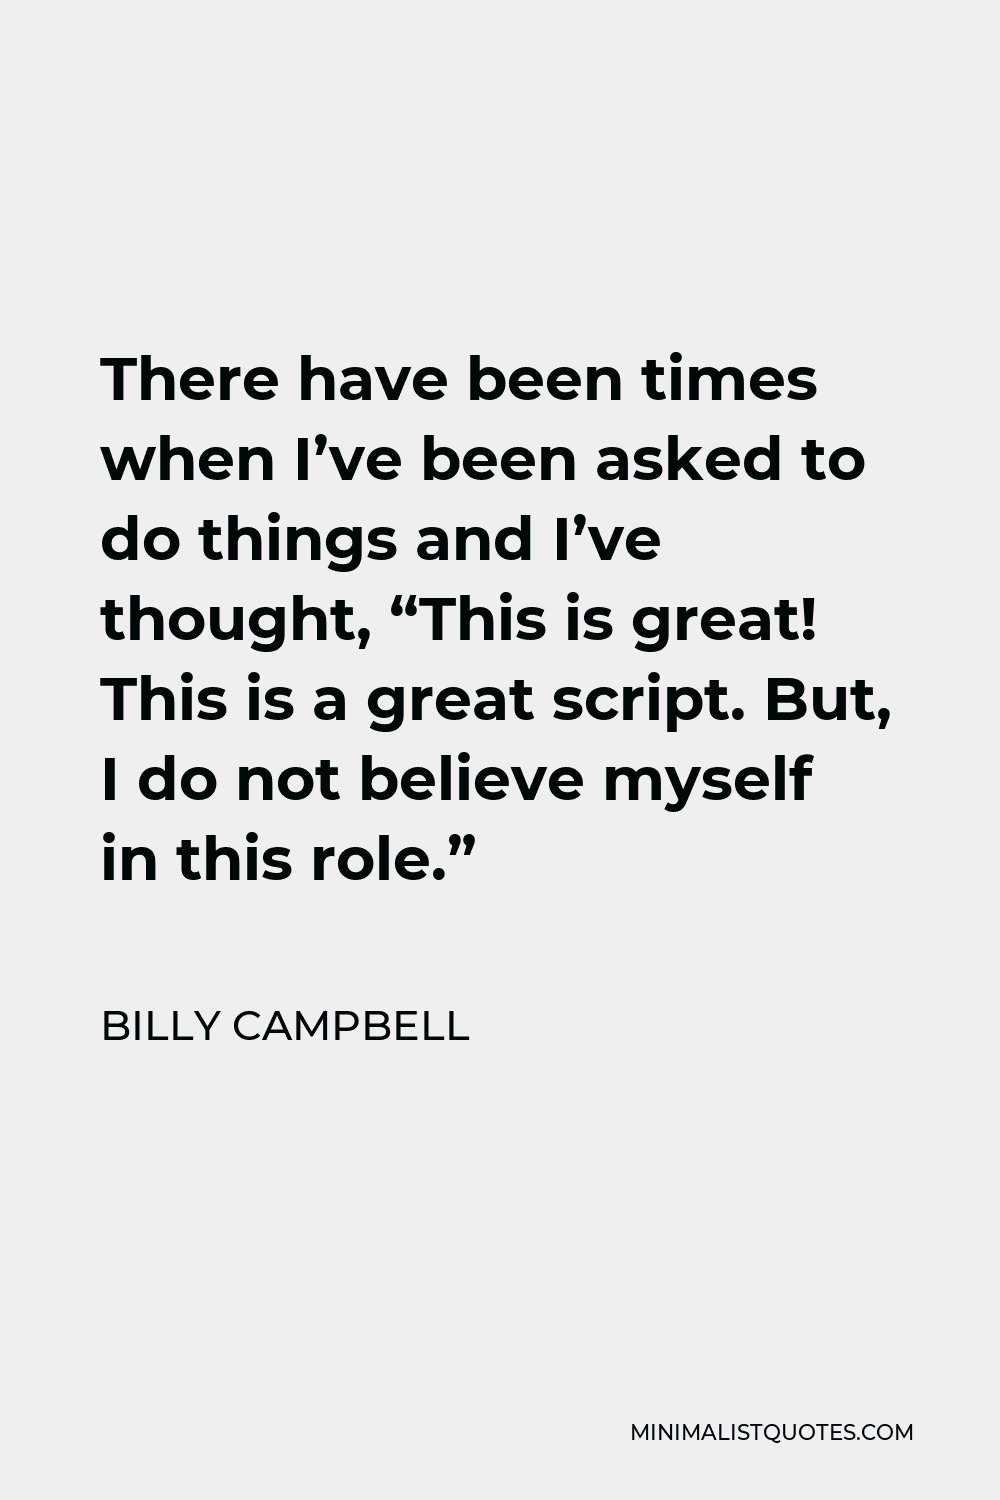 Billy Campbell Quote - There have been times when I’ve been asked to do things and I’ve thought, “This is great! This is a great script. But, I do not believe myself in this role.”